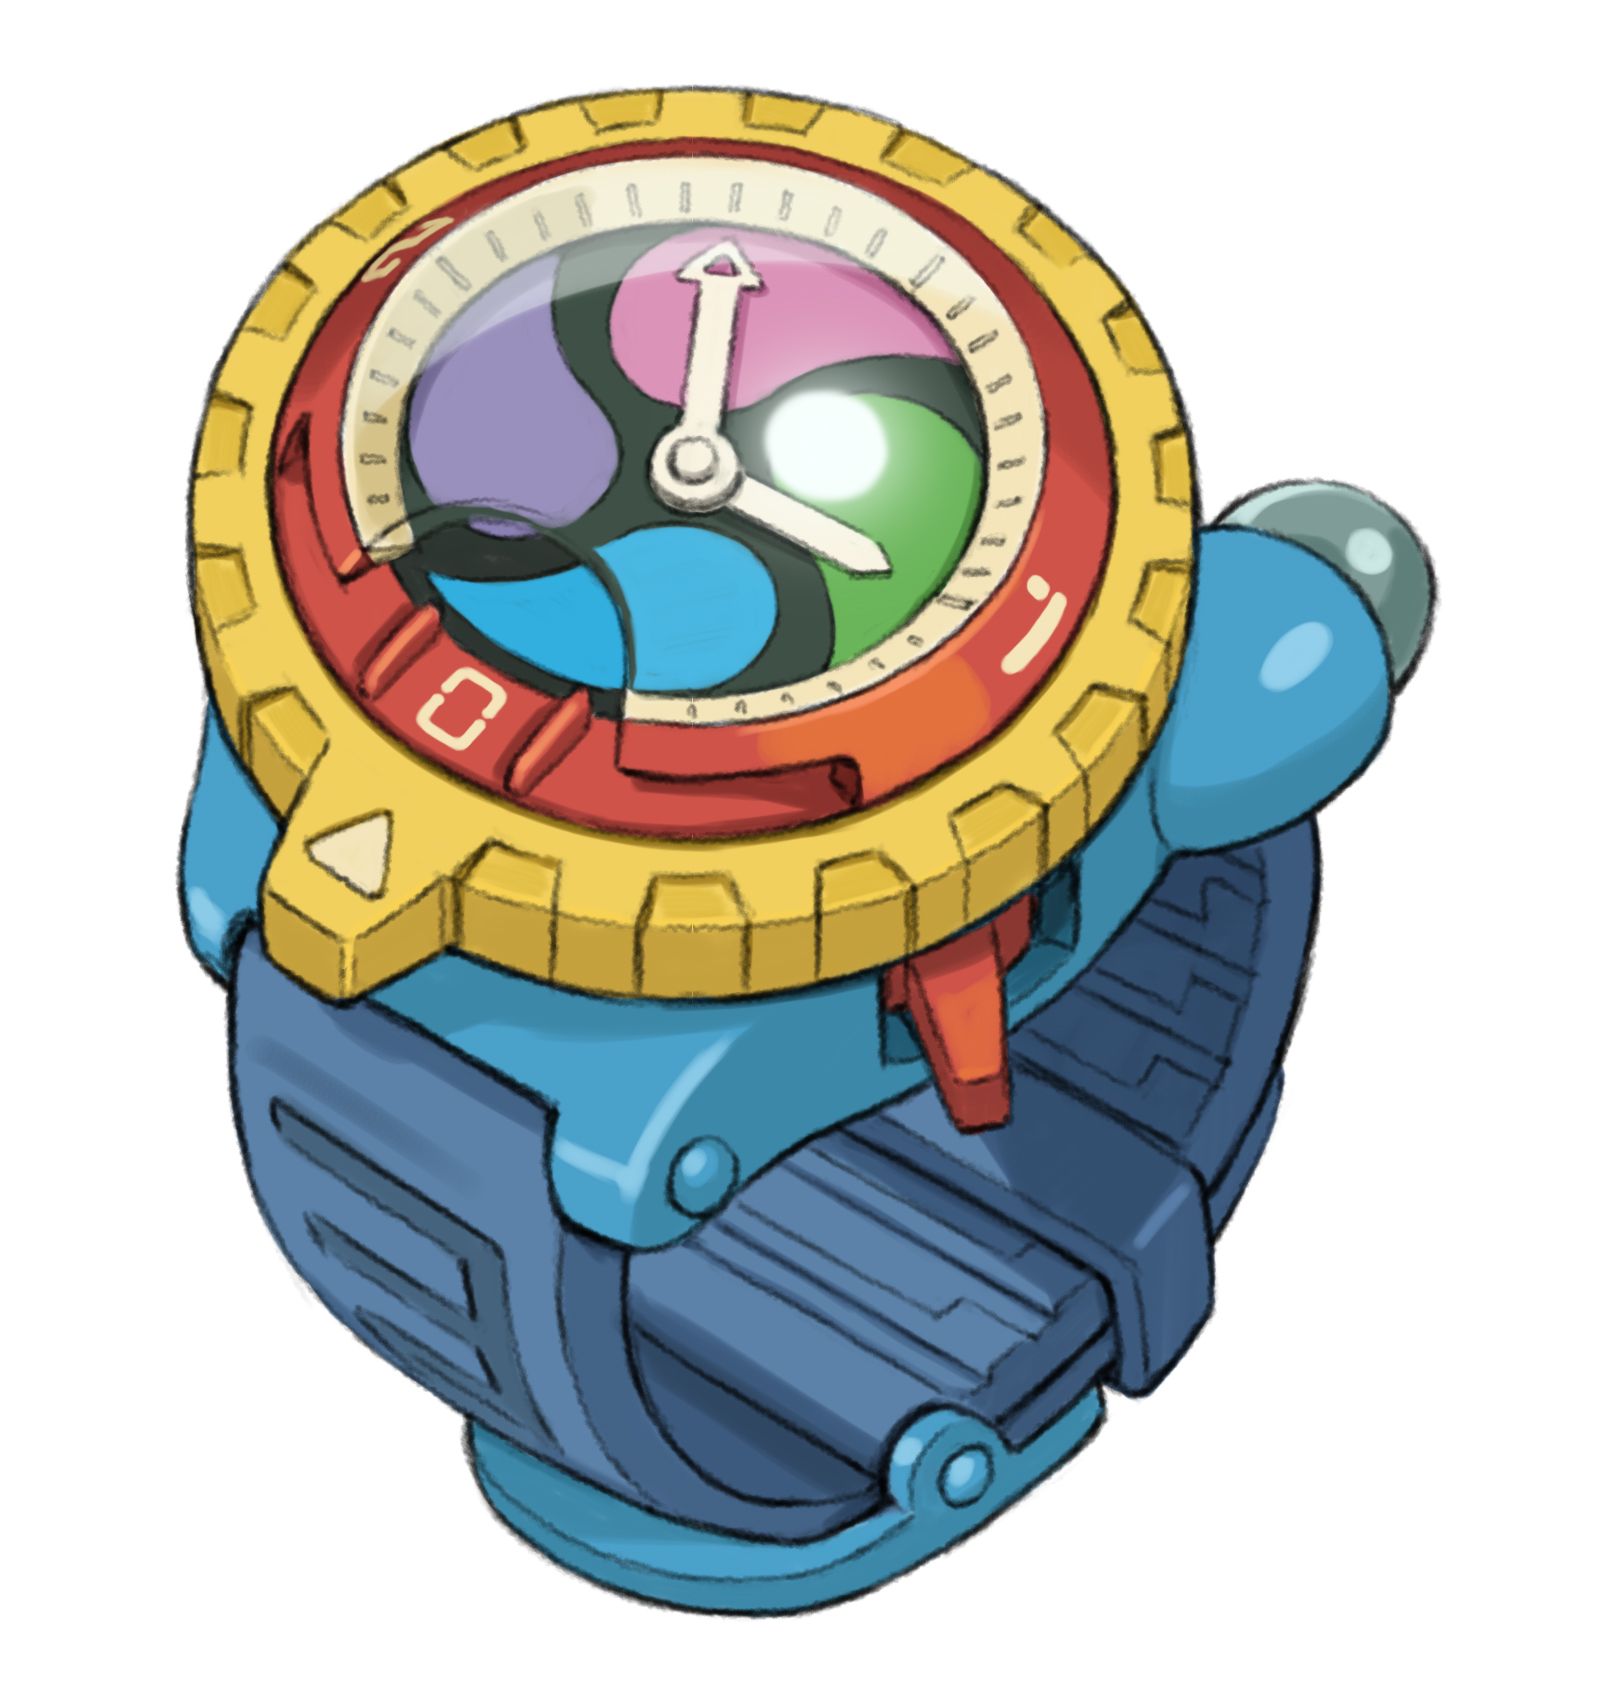 Yo-Kai Watch 2 heads to the West on September 30 - VG247